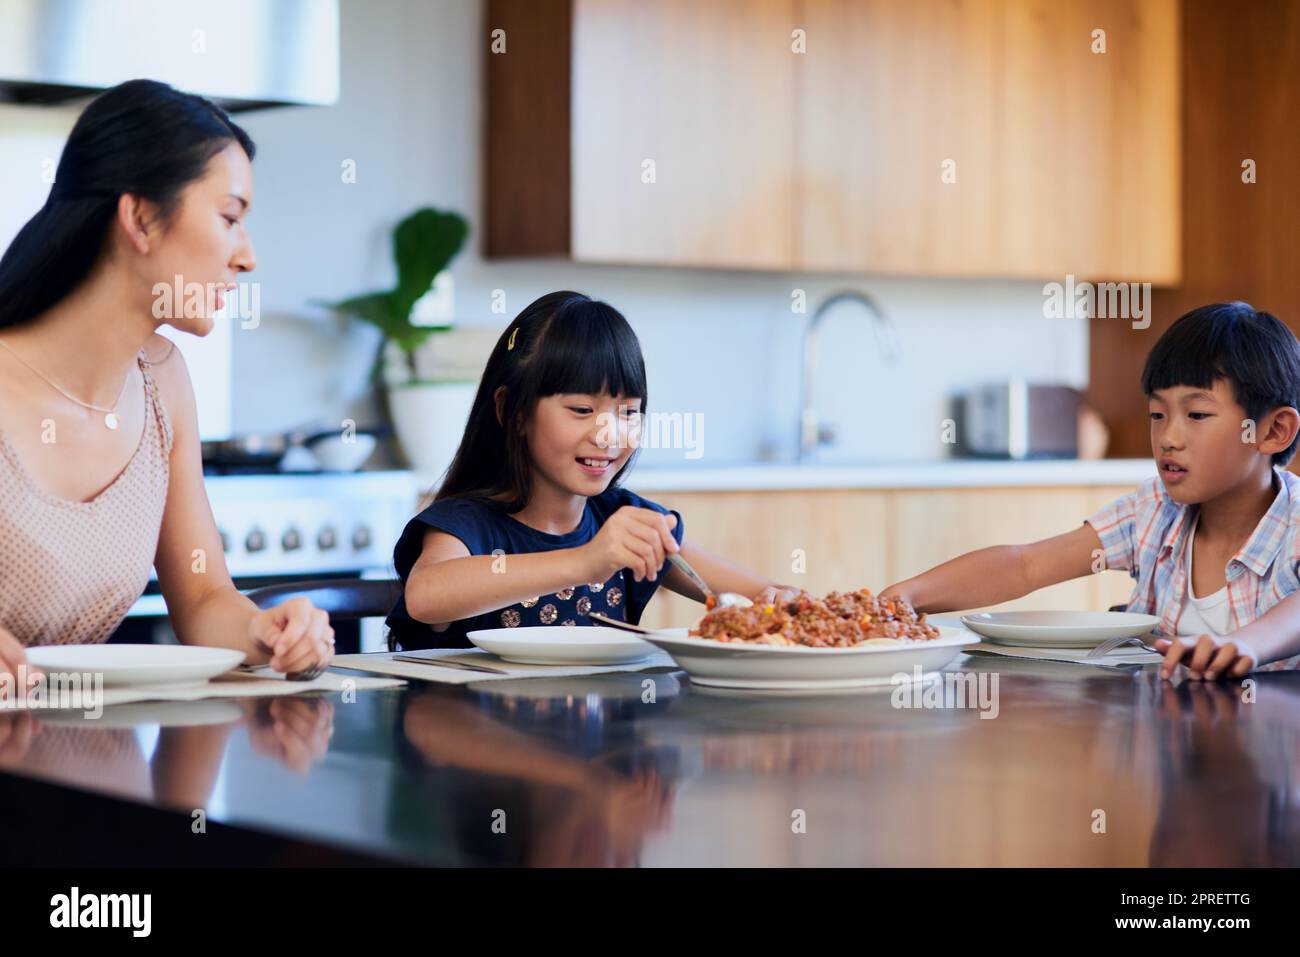 Mom made our favourite meal. two little children enjoying a meal with their mother at home. Stock Photo